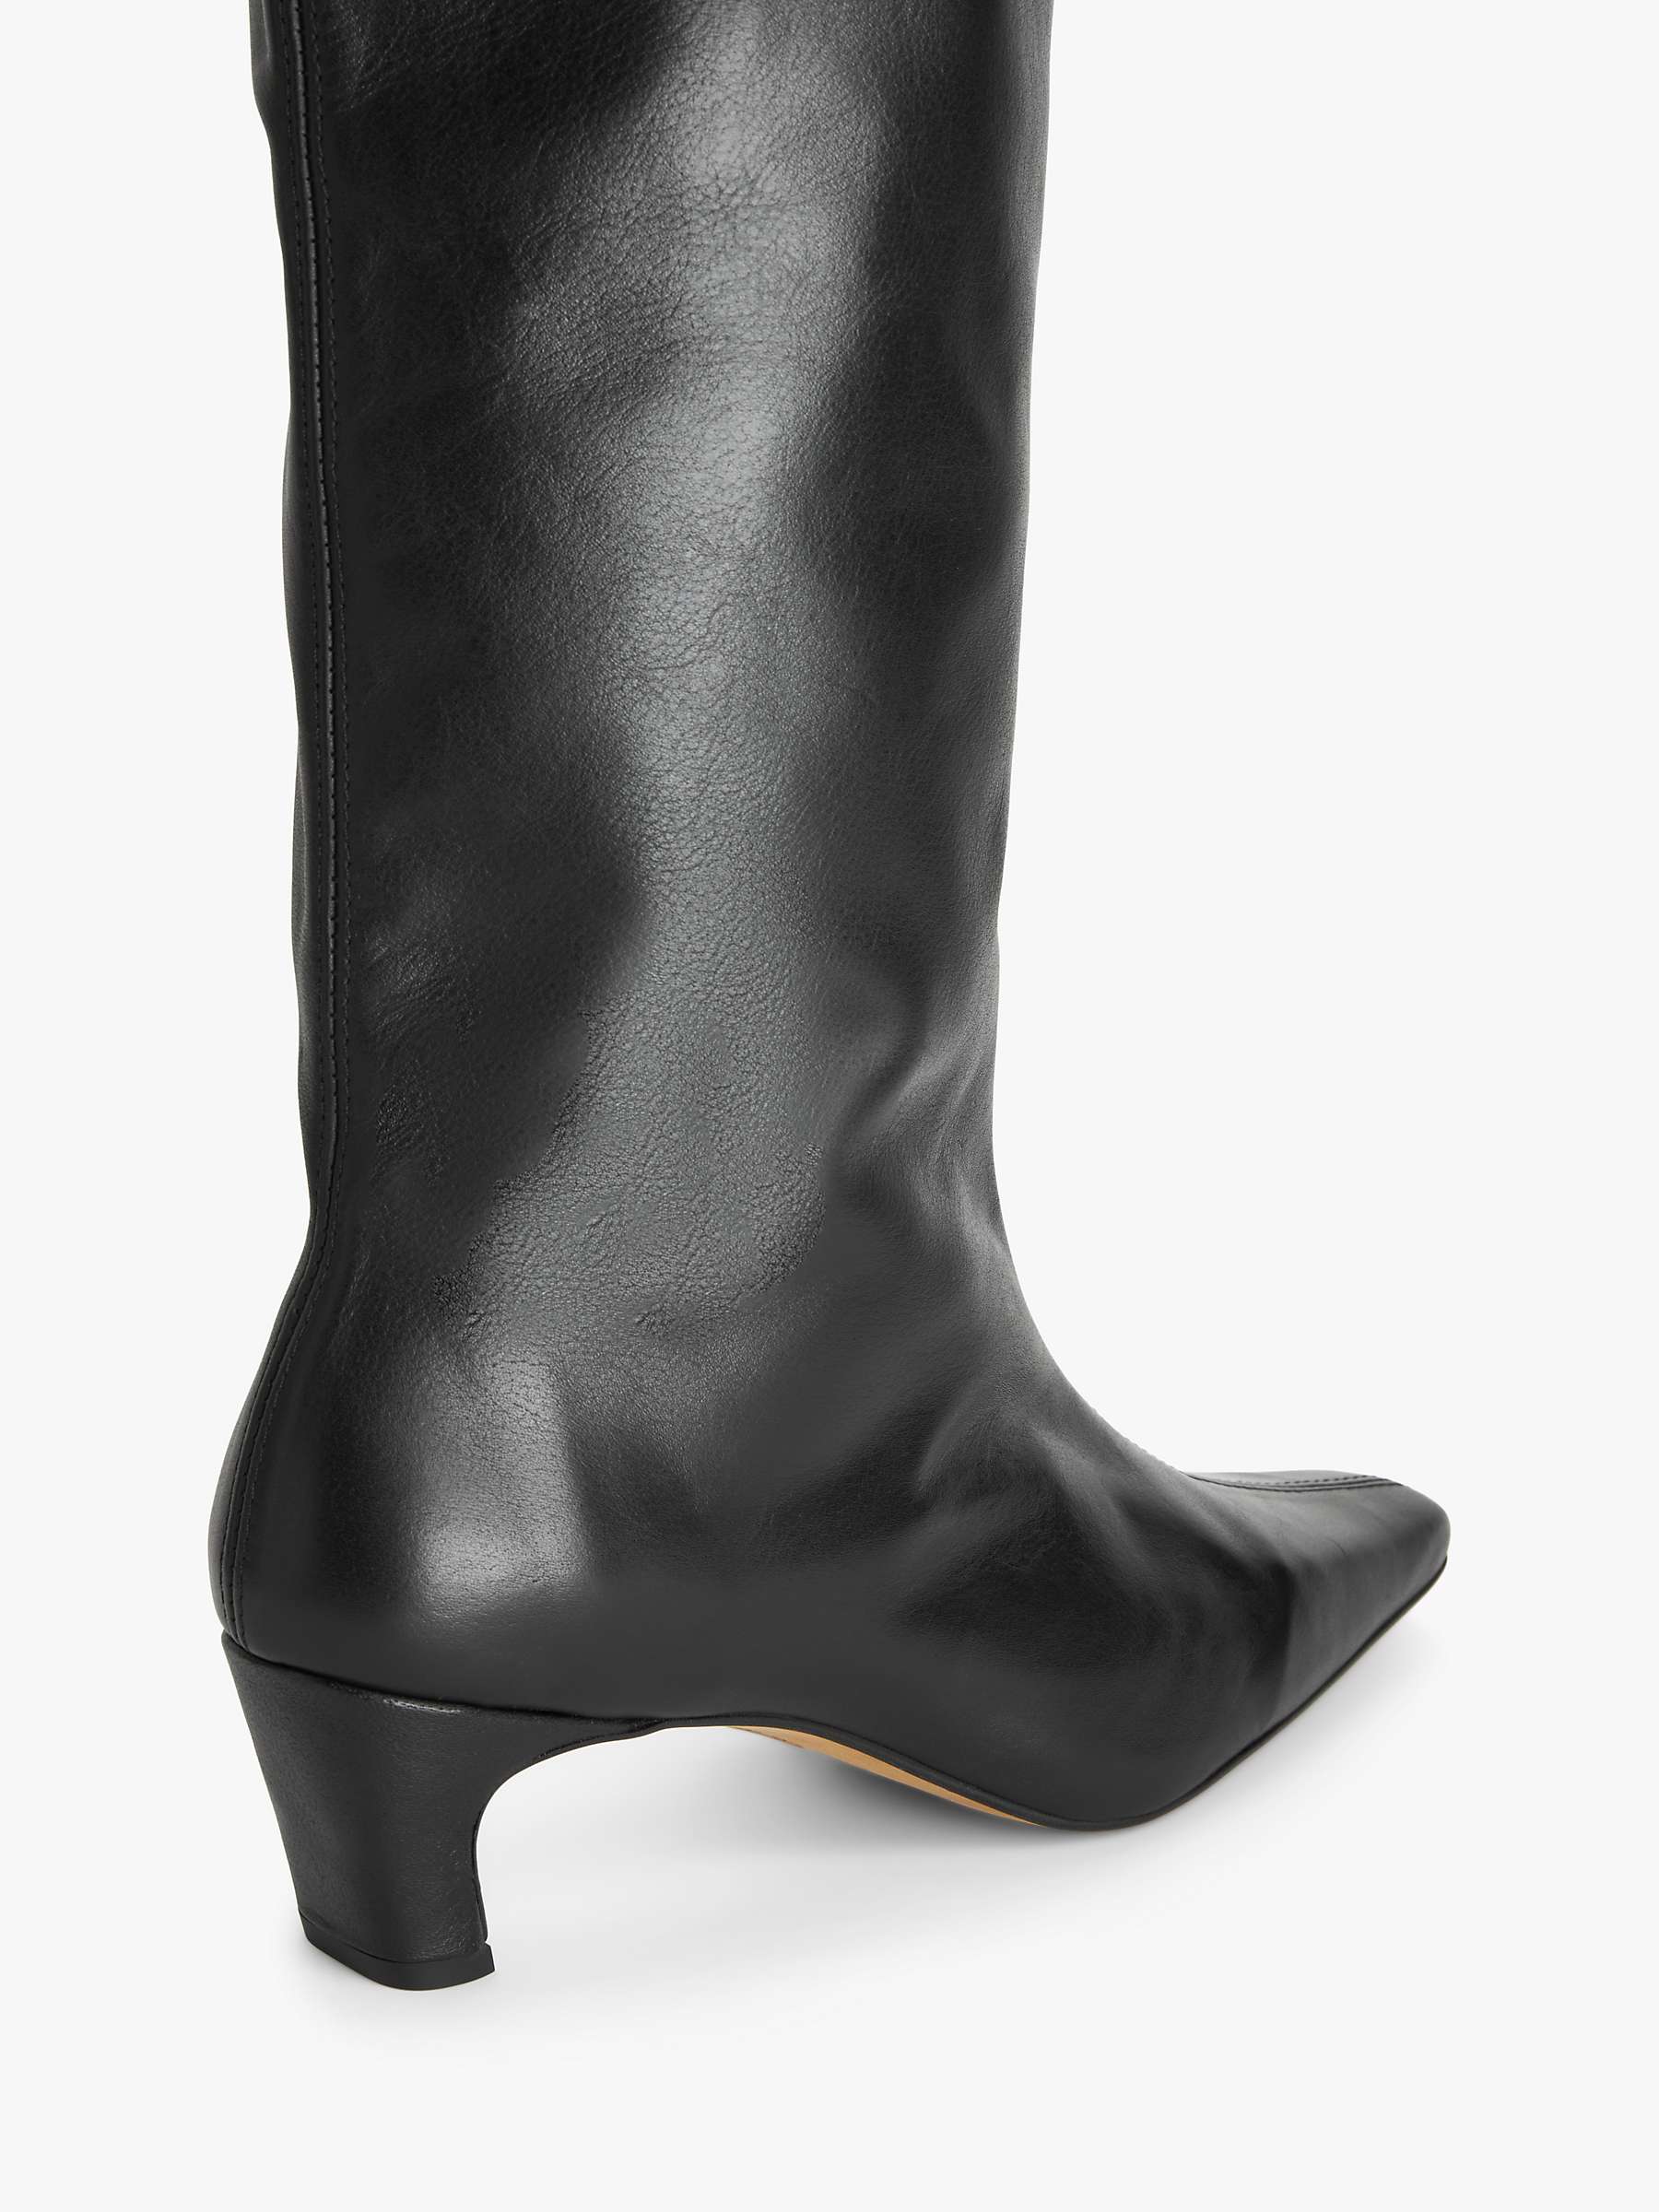 Buy John Lewis Sydnie Leather Chisel Toe Pull On Knee Boots Online at johnlewis.com